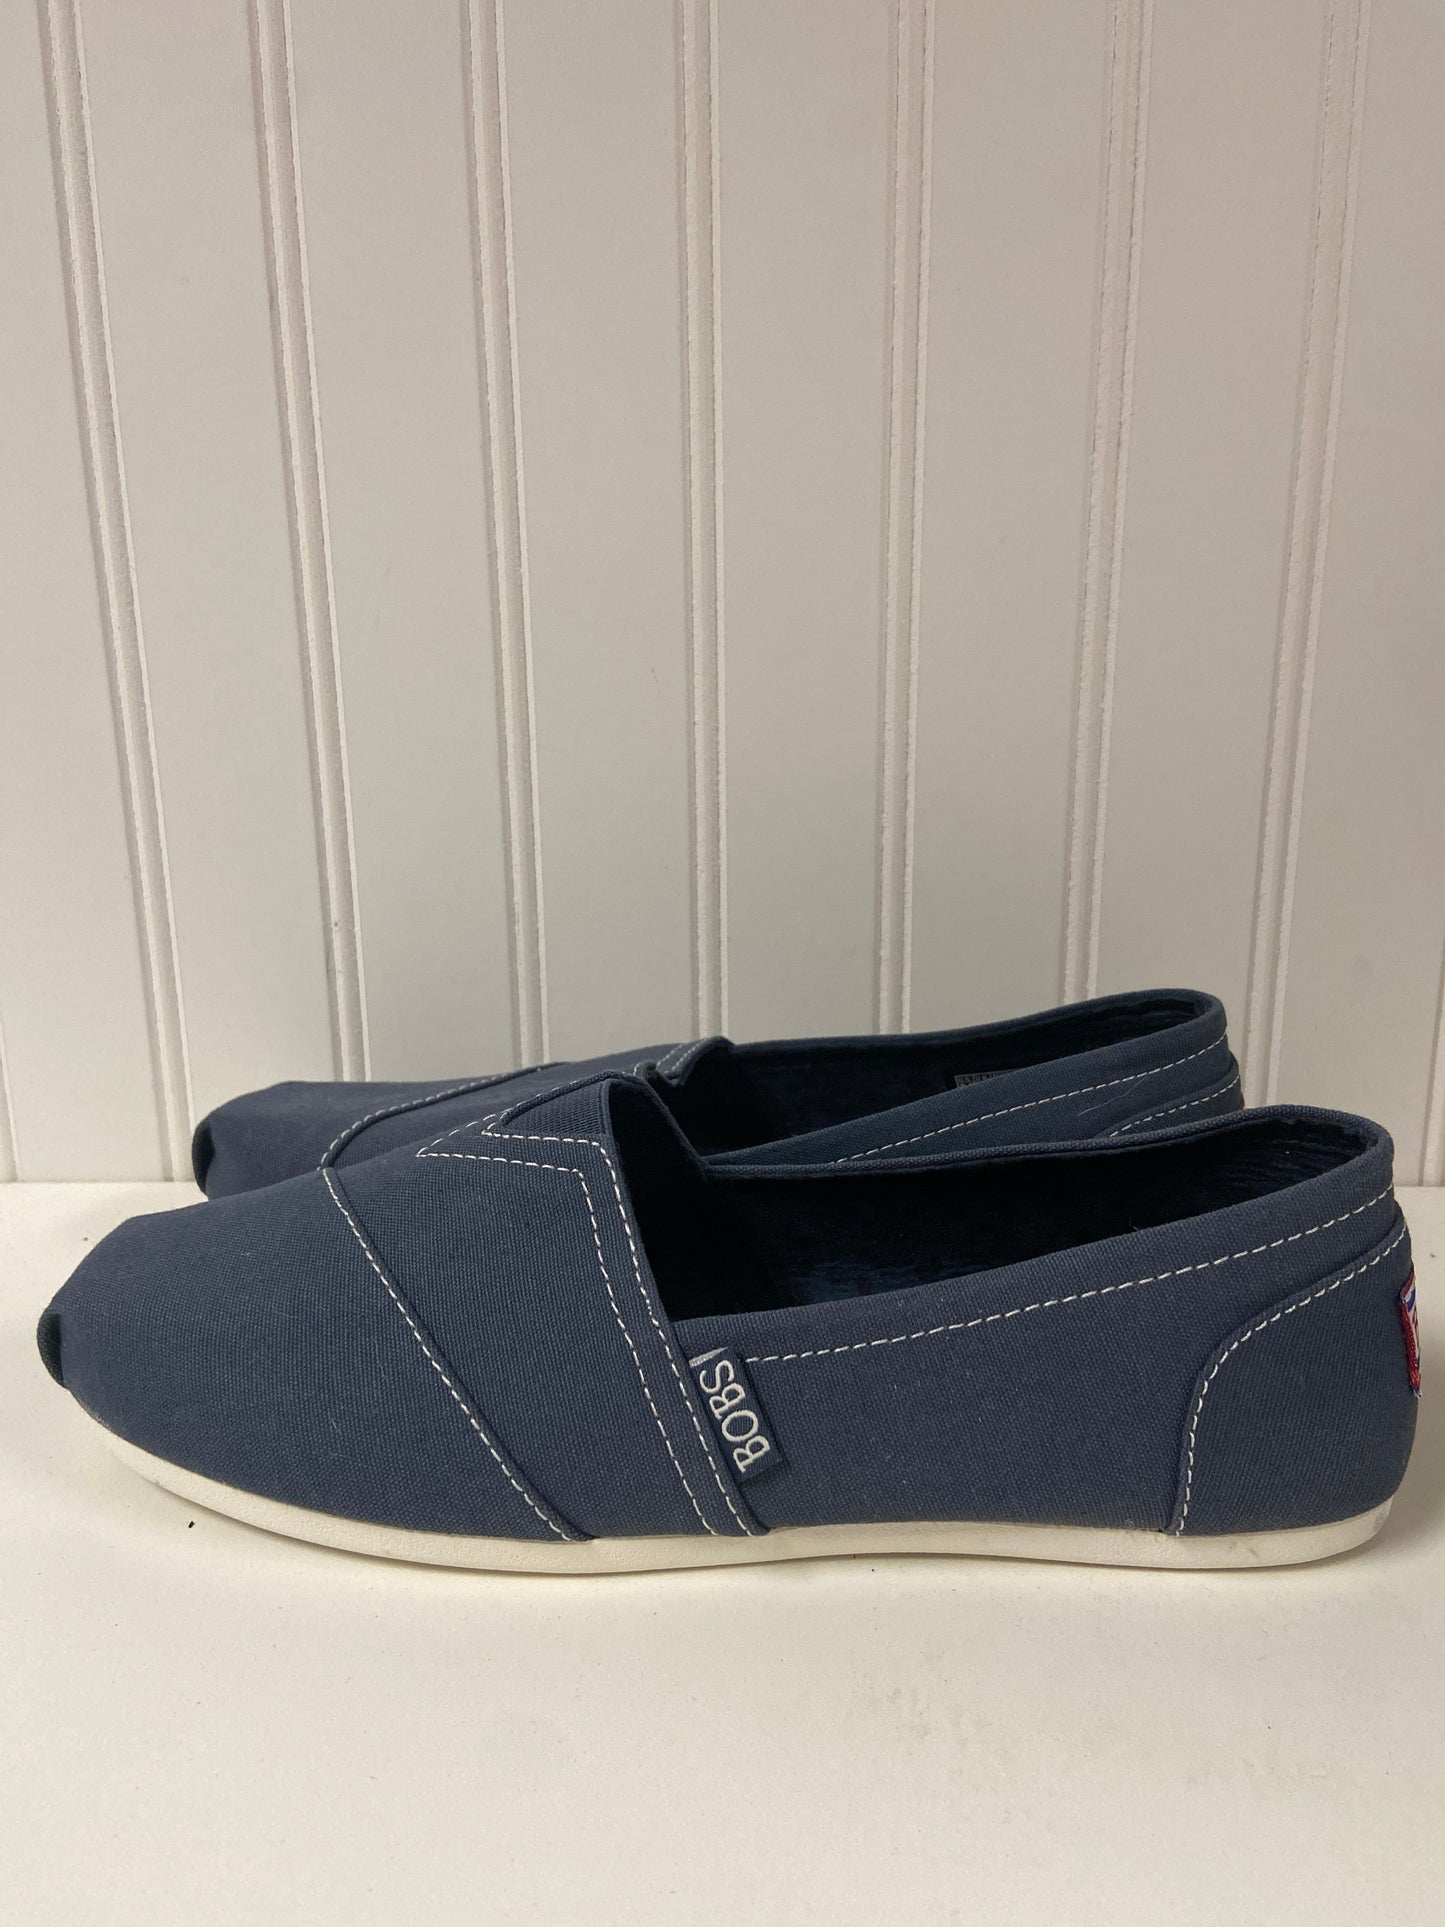 Navy Shoes Flats Bobs, Size 8.5